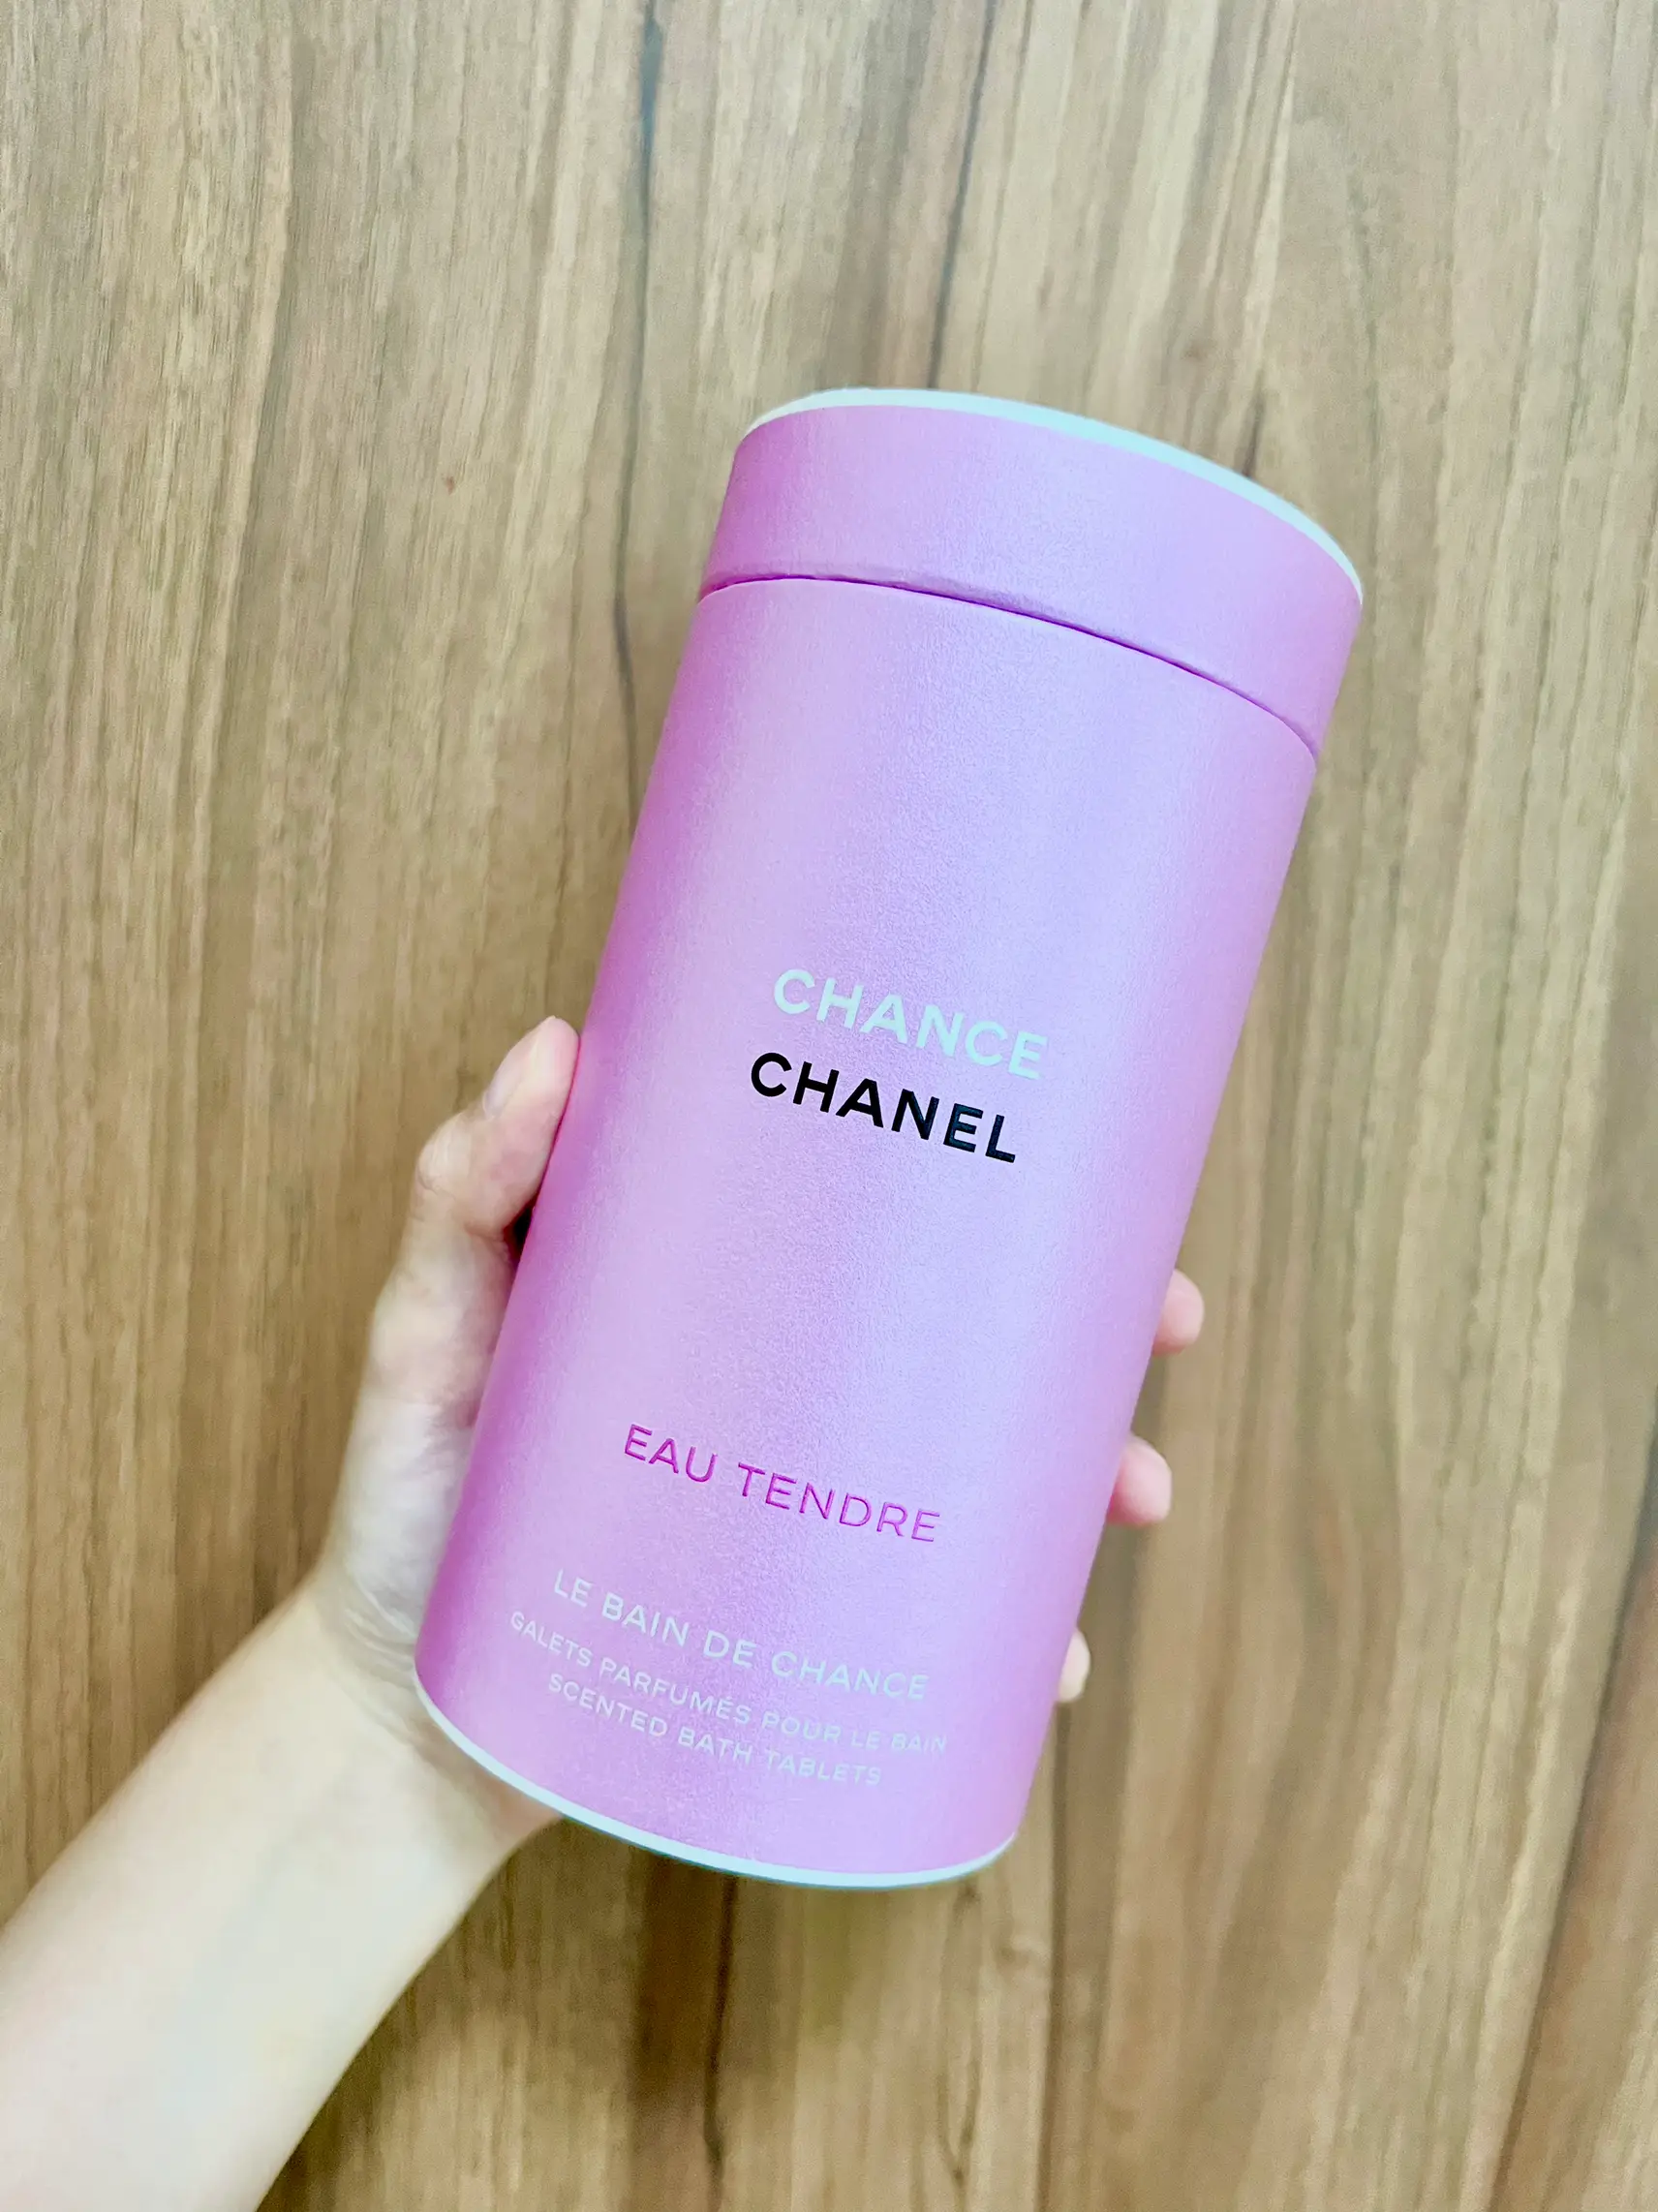 CHANEL CHANCE EAU TENDRE, Gallery posted by Borbell